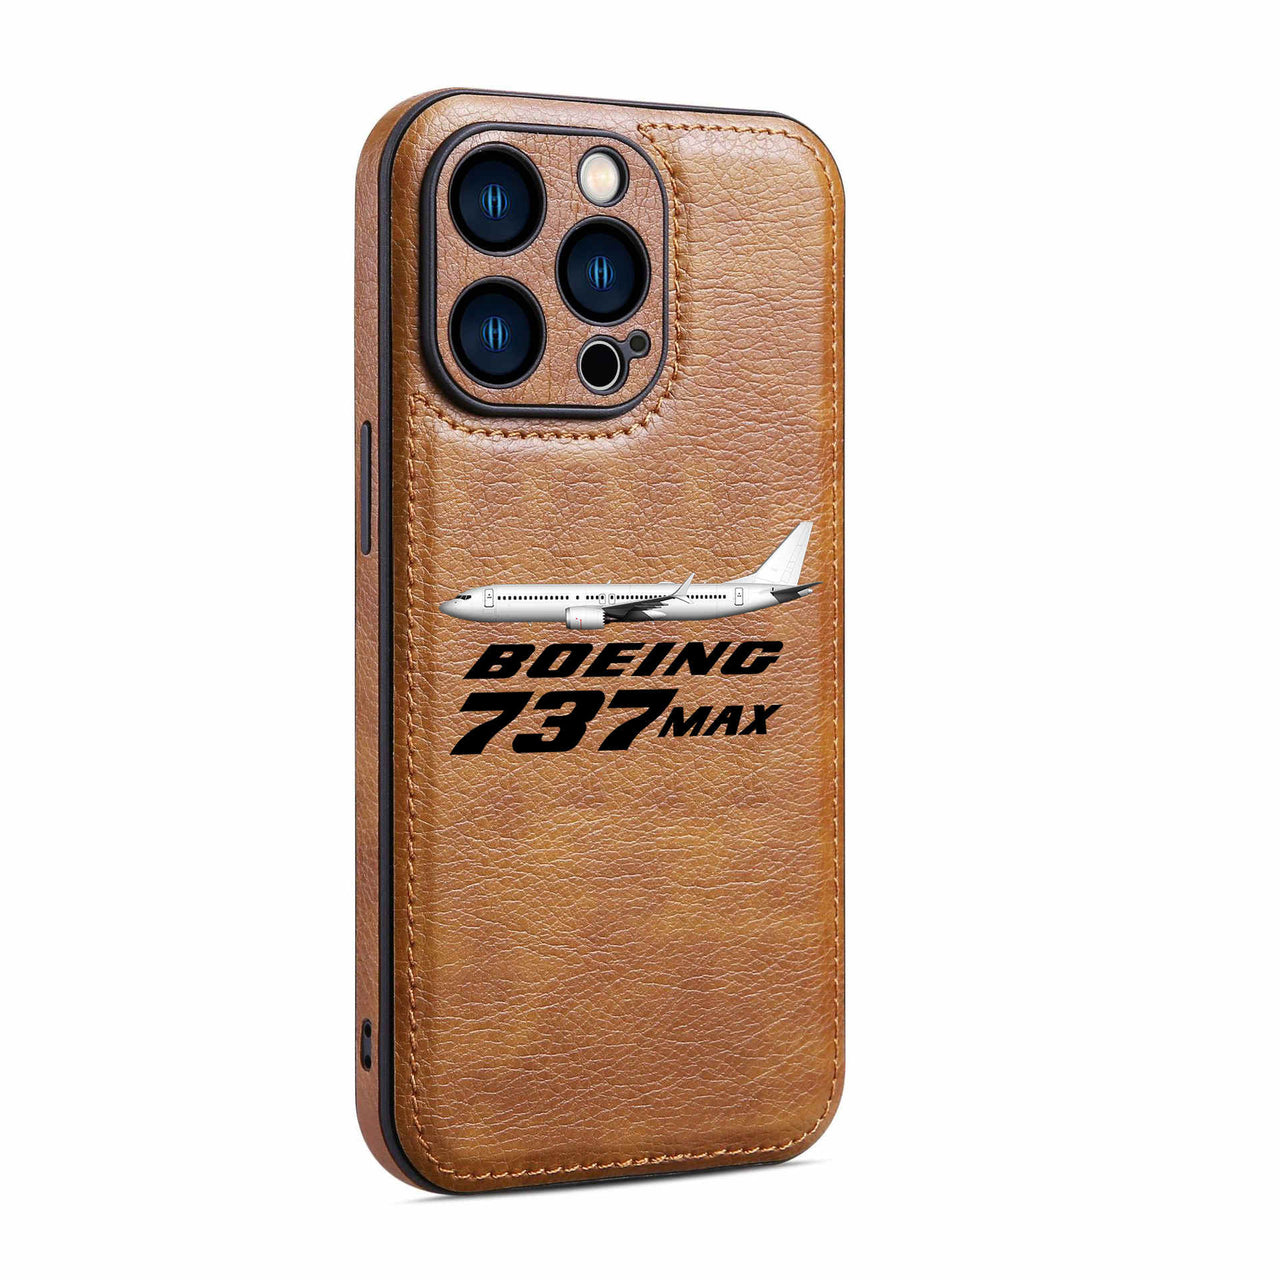 The Boeing 737Max Designed Leather iPhone Cases